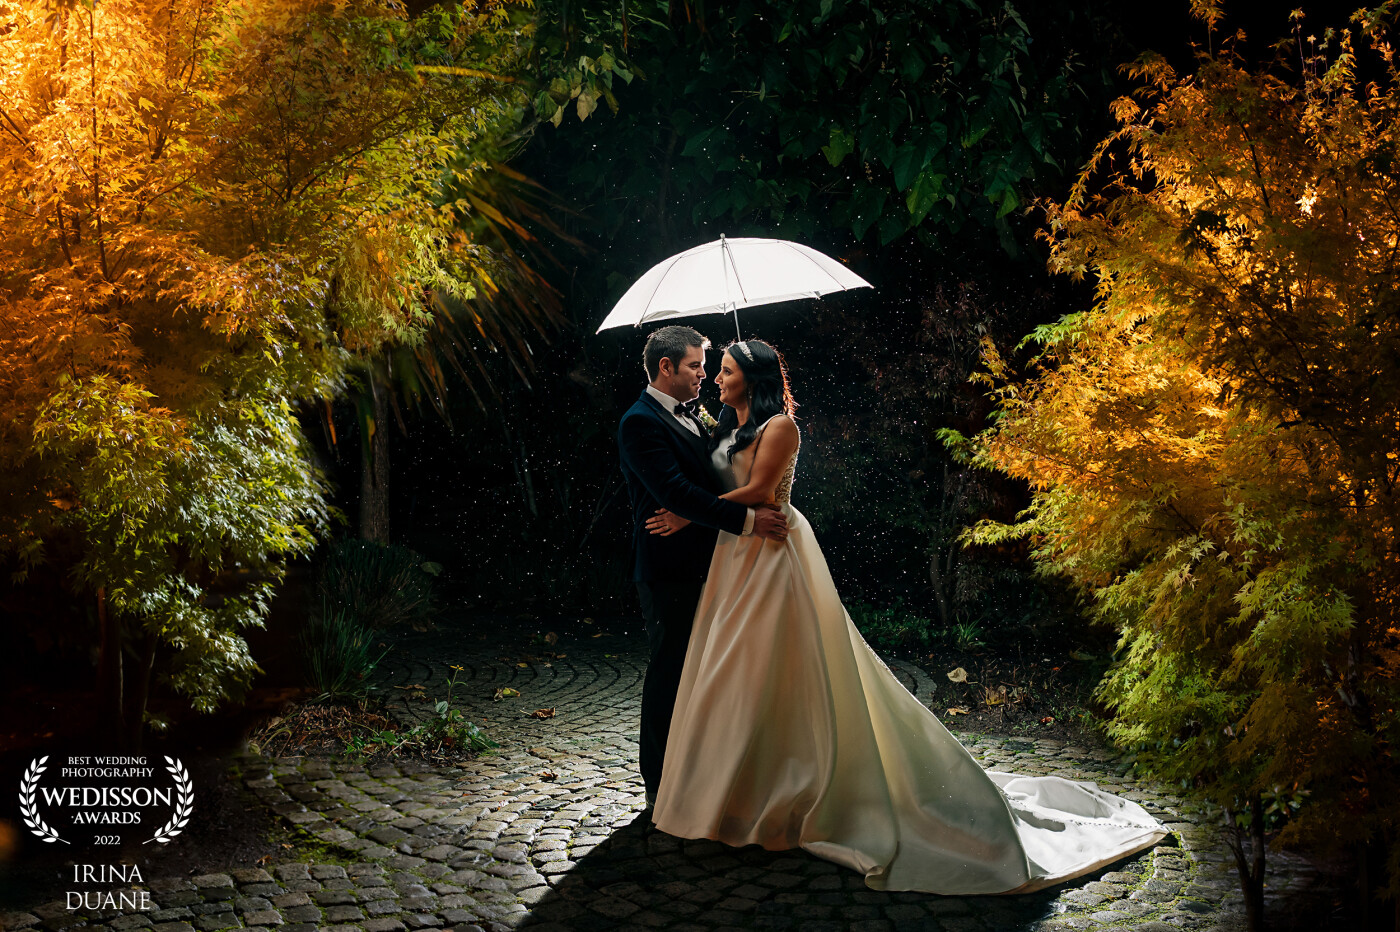 Rain didn’t stop this couple from having the best day ever! Photo take in Raheen House in Clonmel, Ireland. I used MagMod sphere behind the couple and another flash in one of the bushes to illuminate from inside.